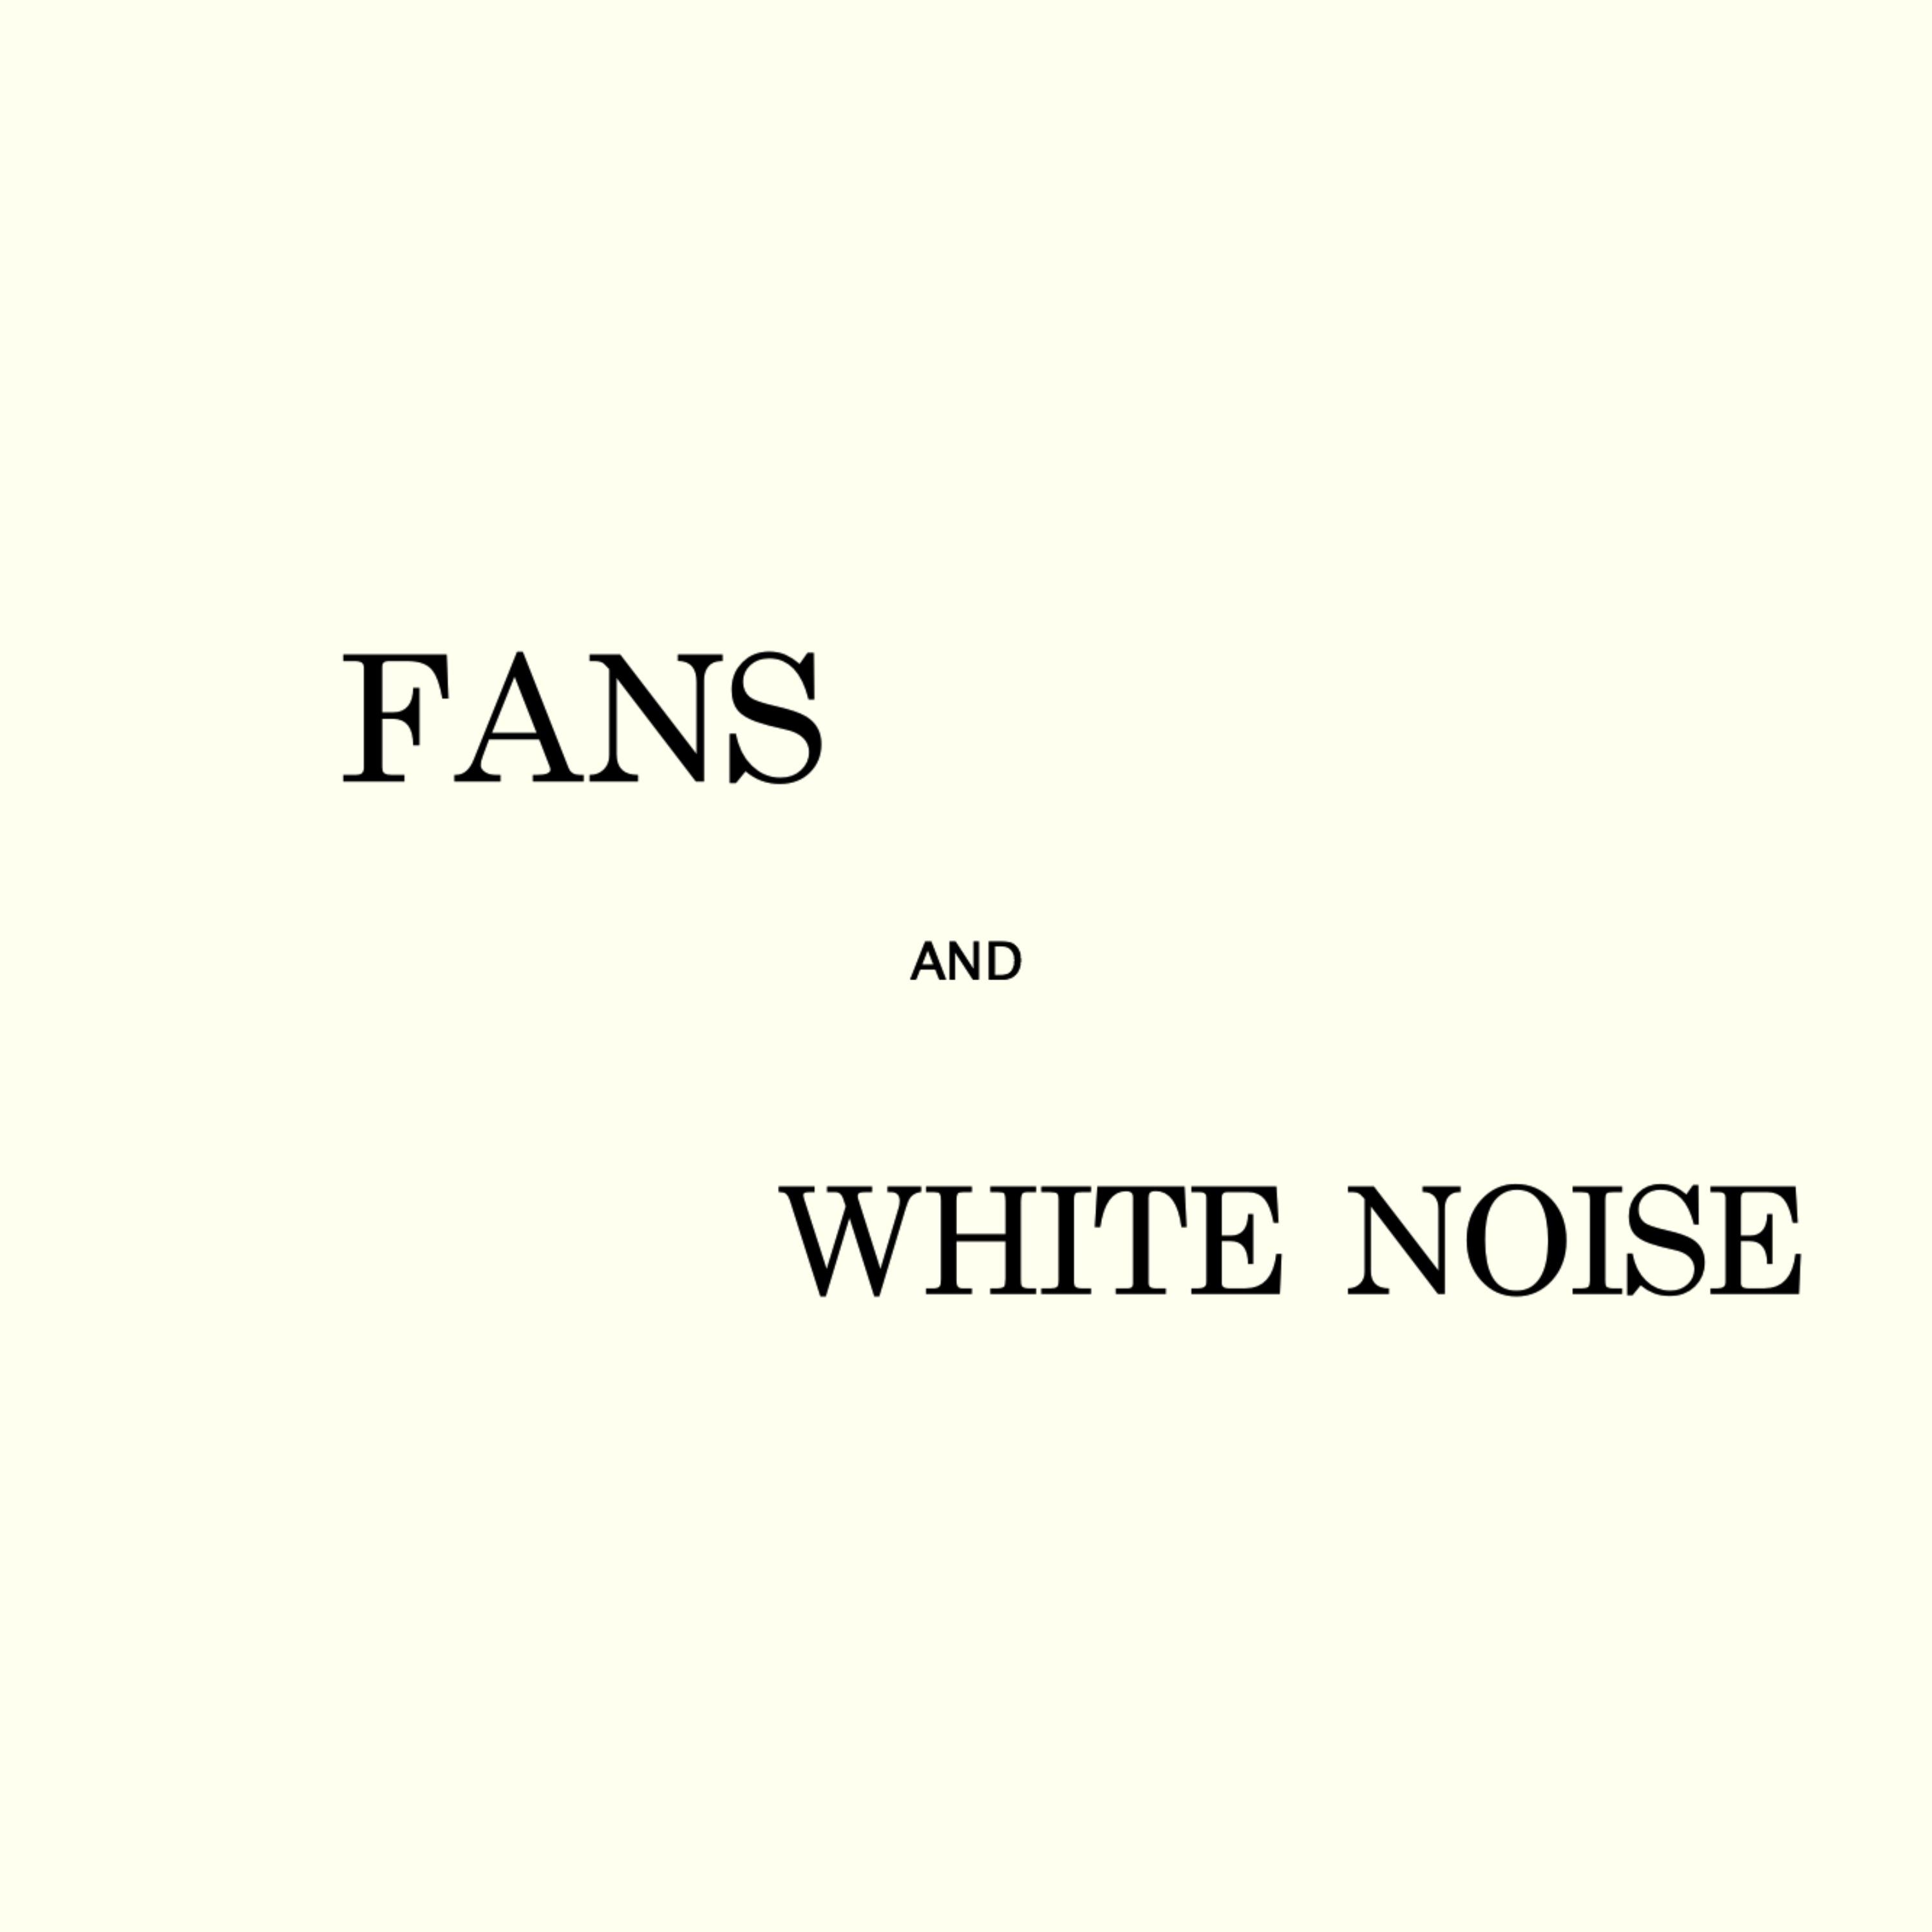 Fans and White Noise